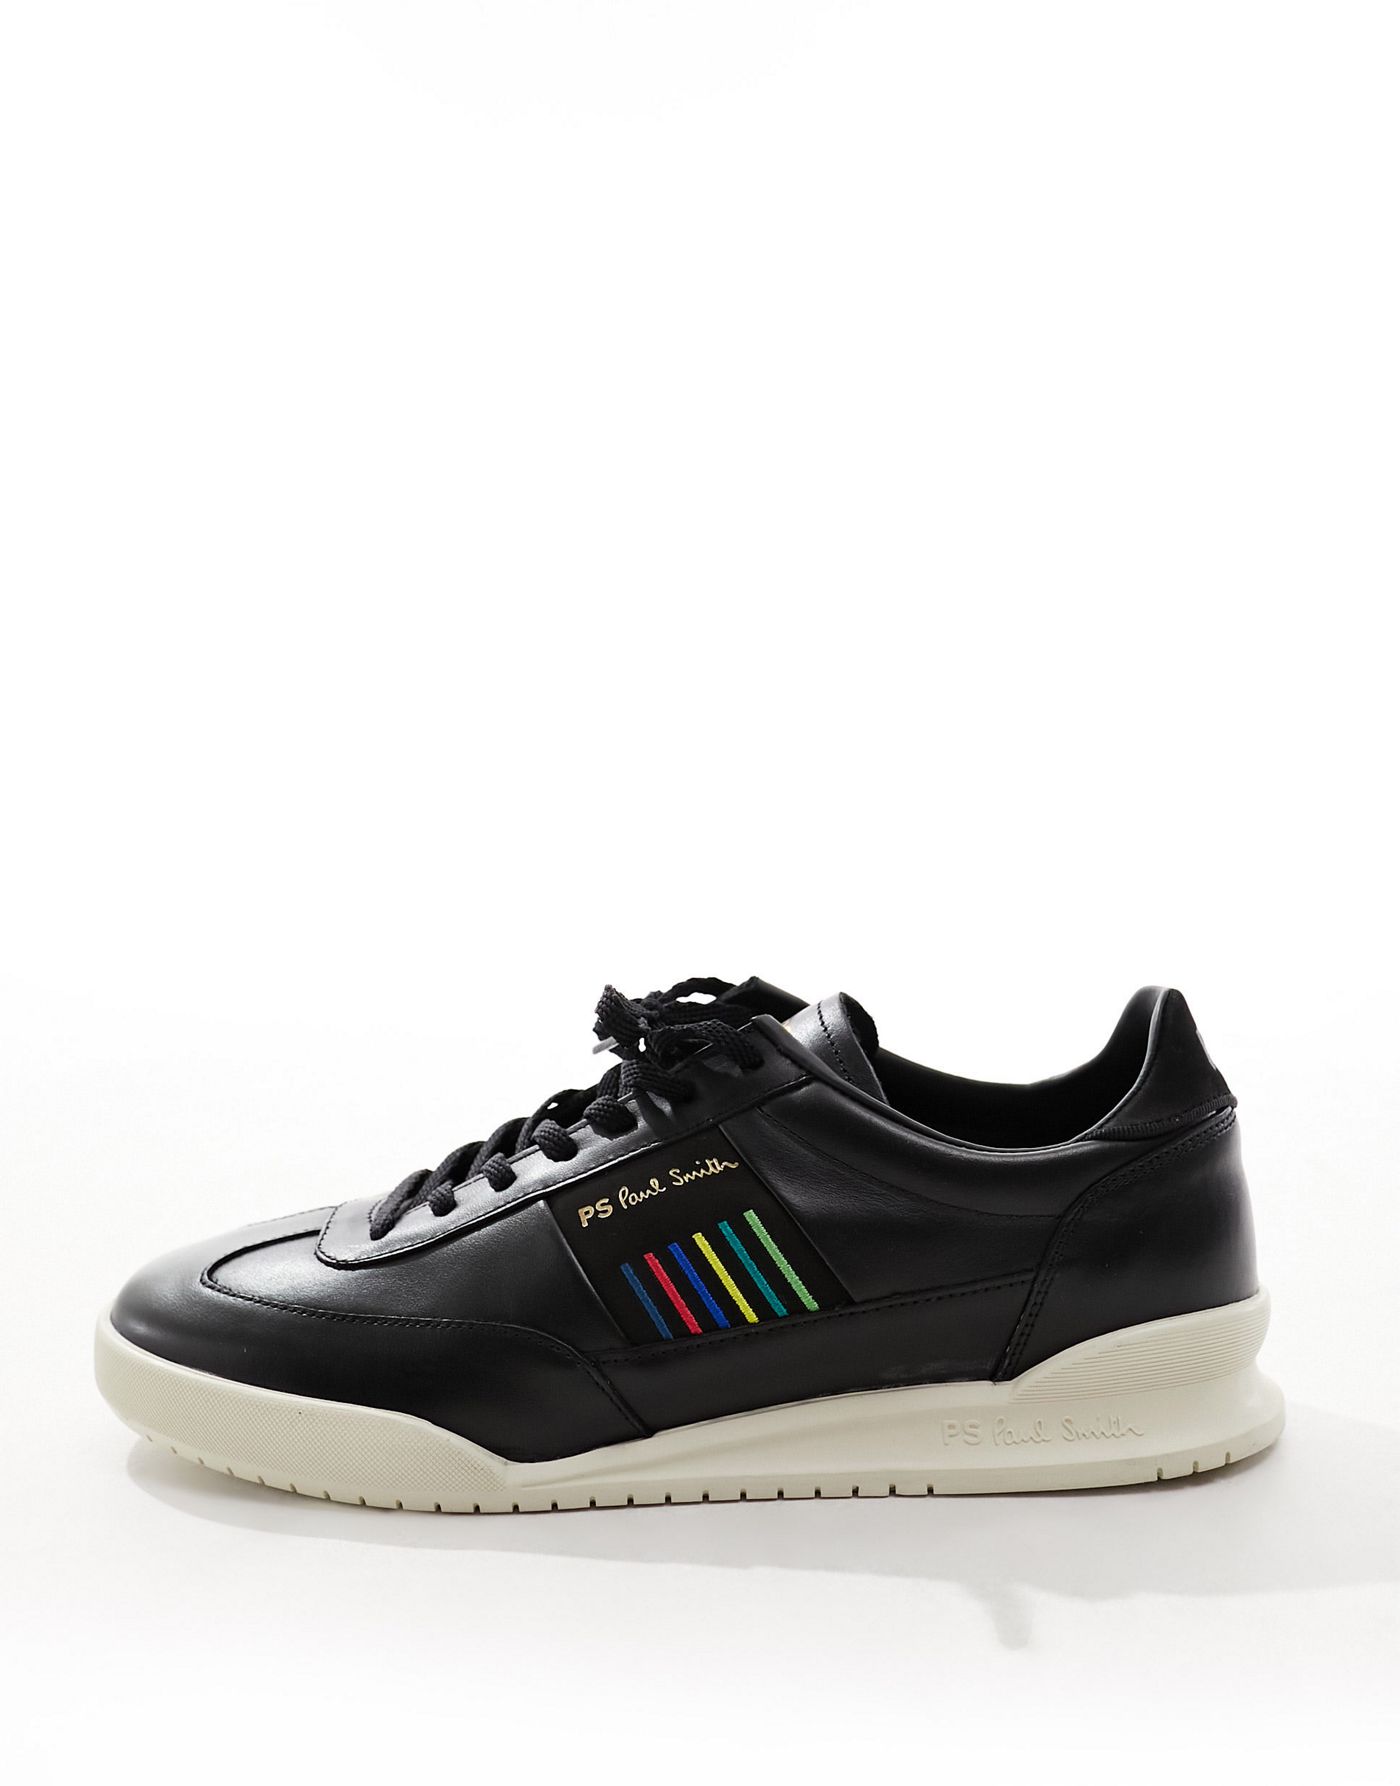 PS Paul Smith Dover side stripe white sole leather trainers in black